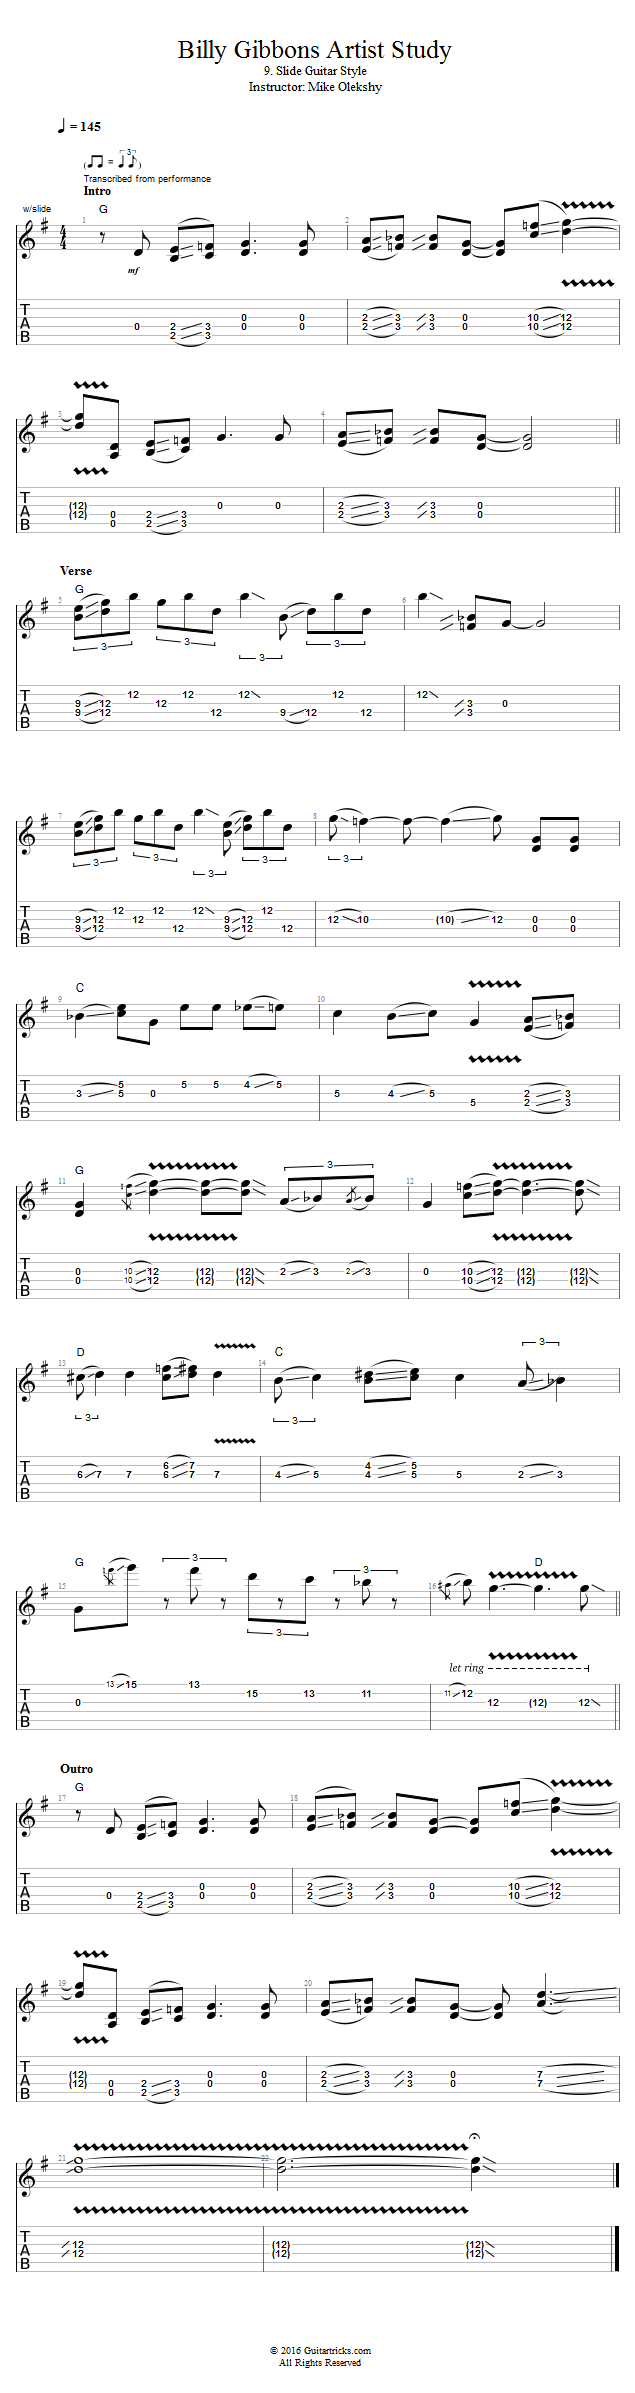 Slide Guitar Style song notation